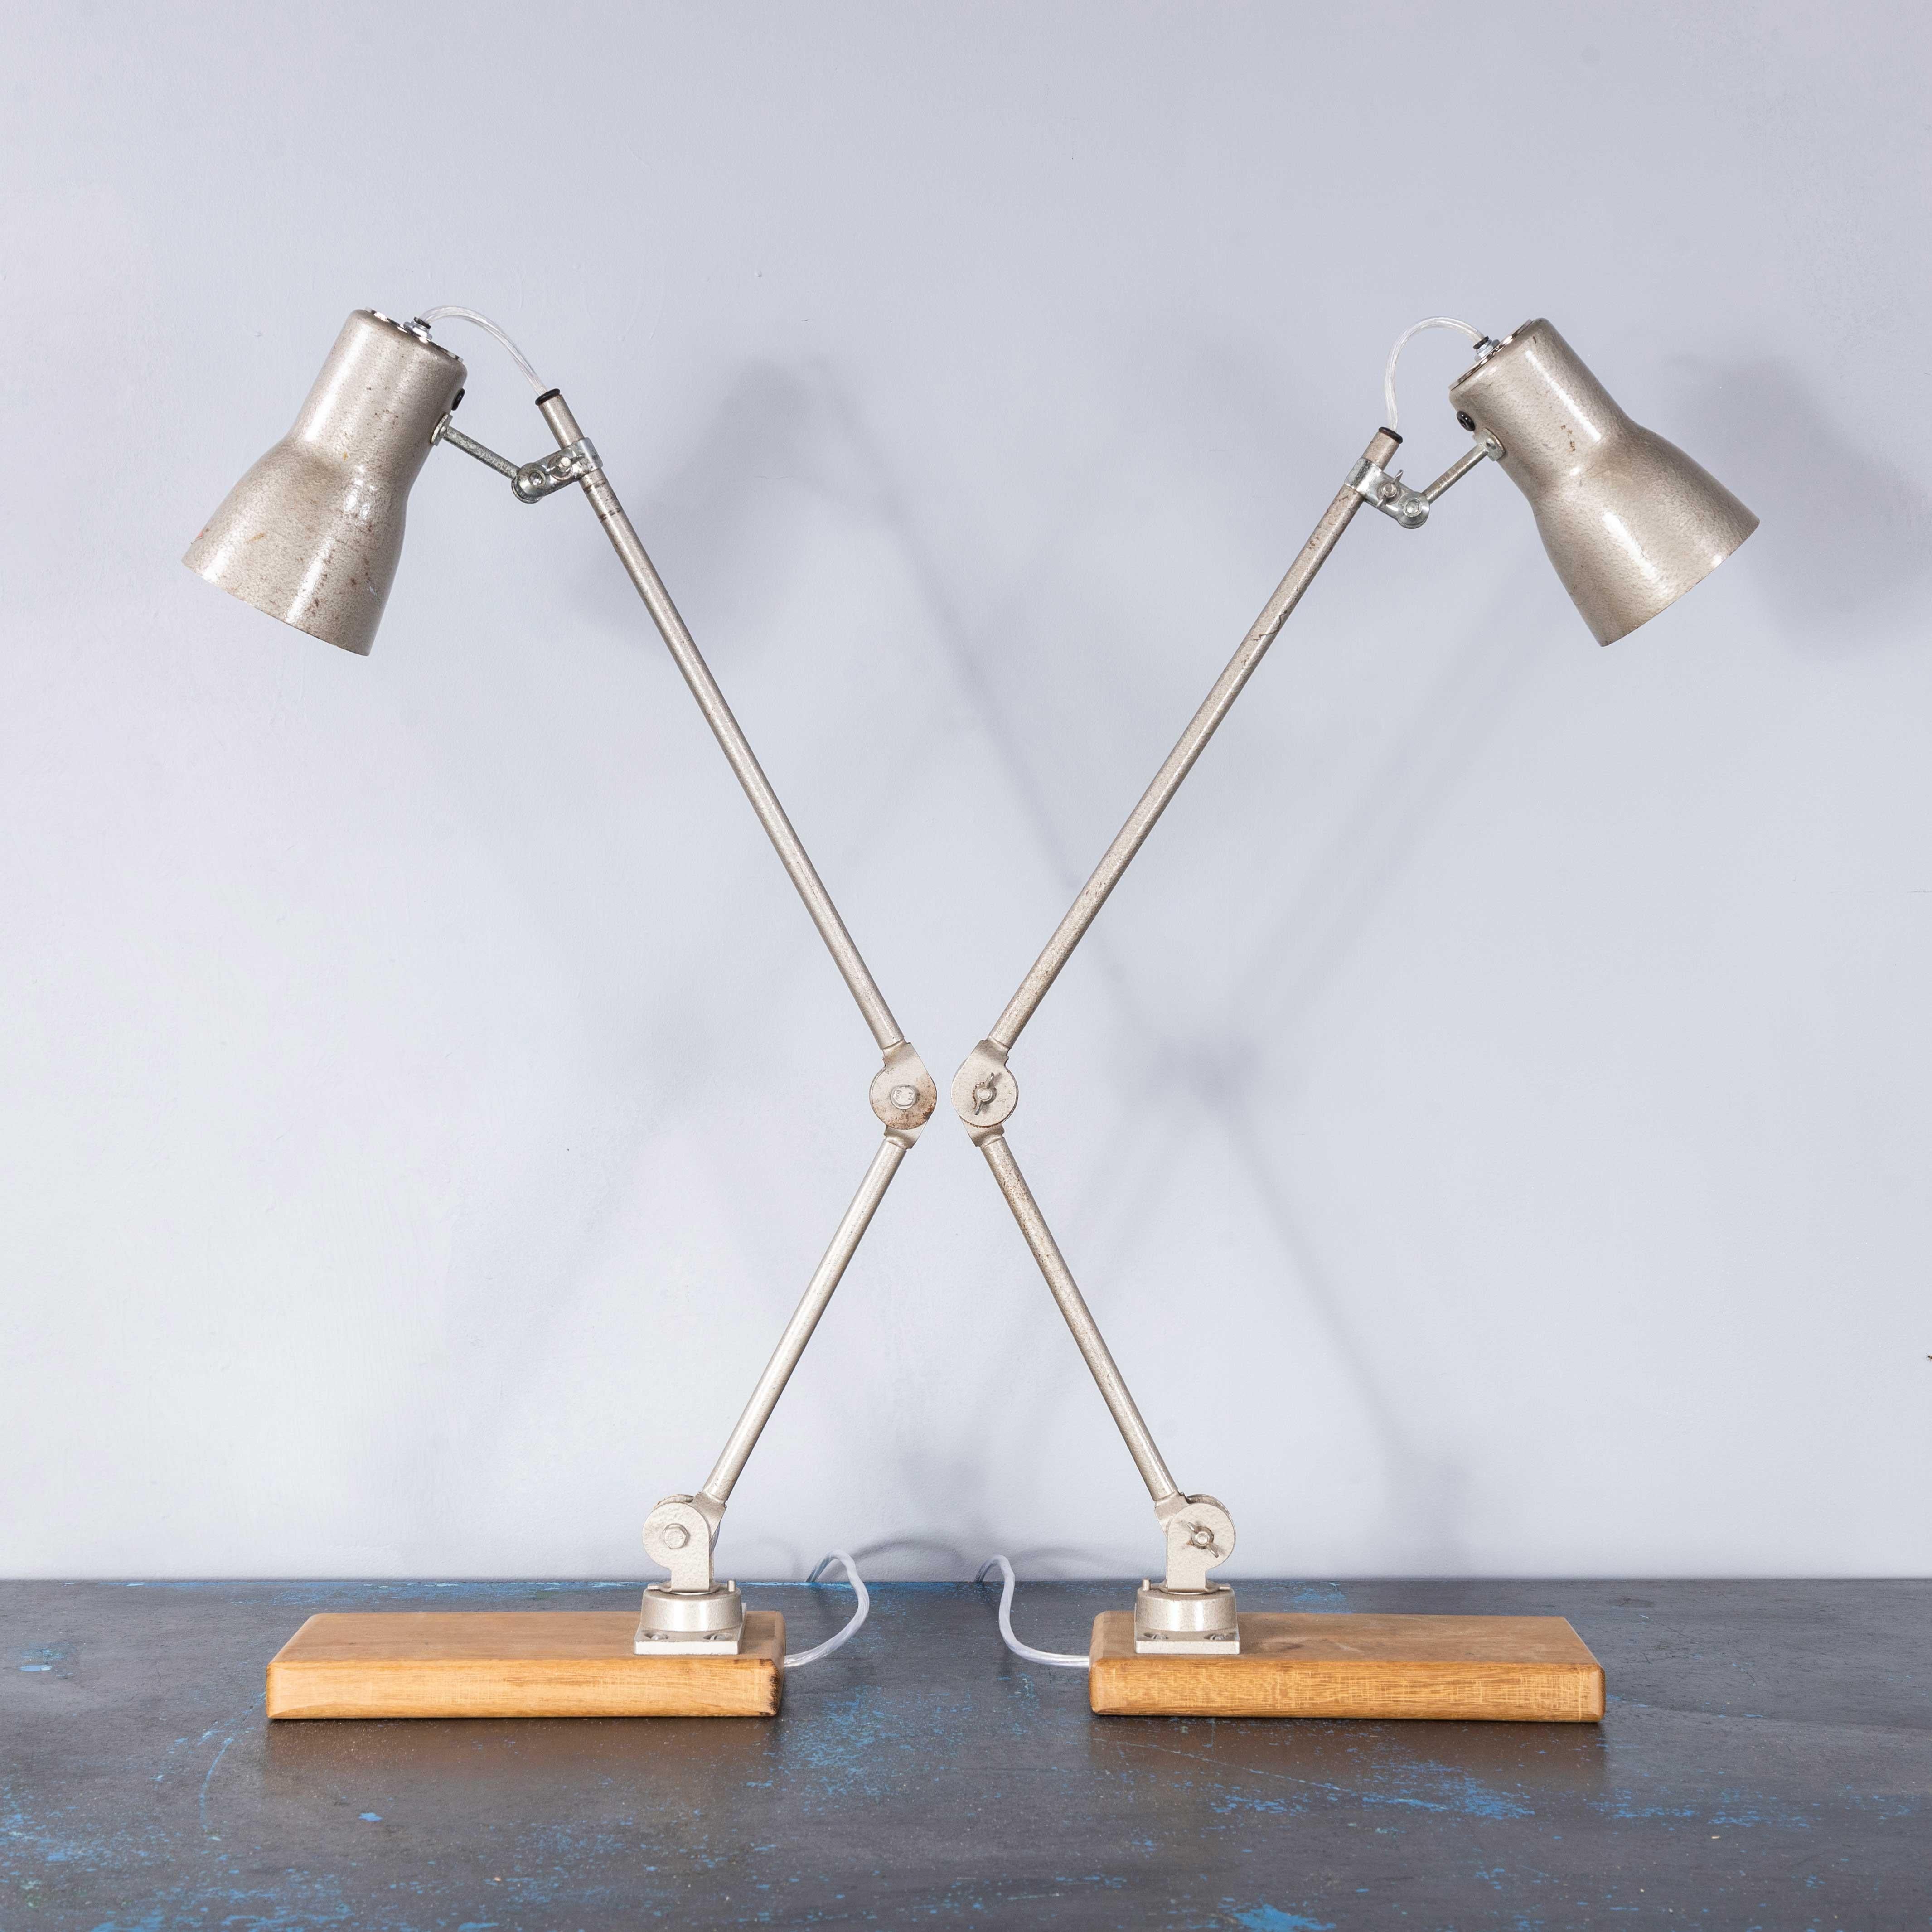 1950's Original Articulated Machinists Desk Lamps By EDL - Pair 1